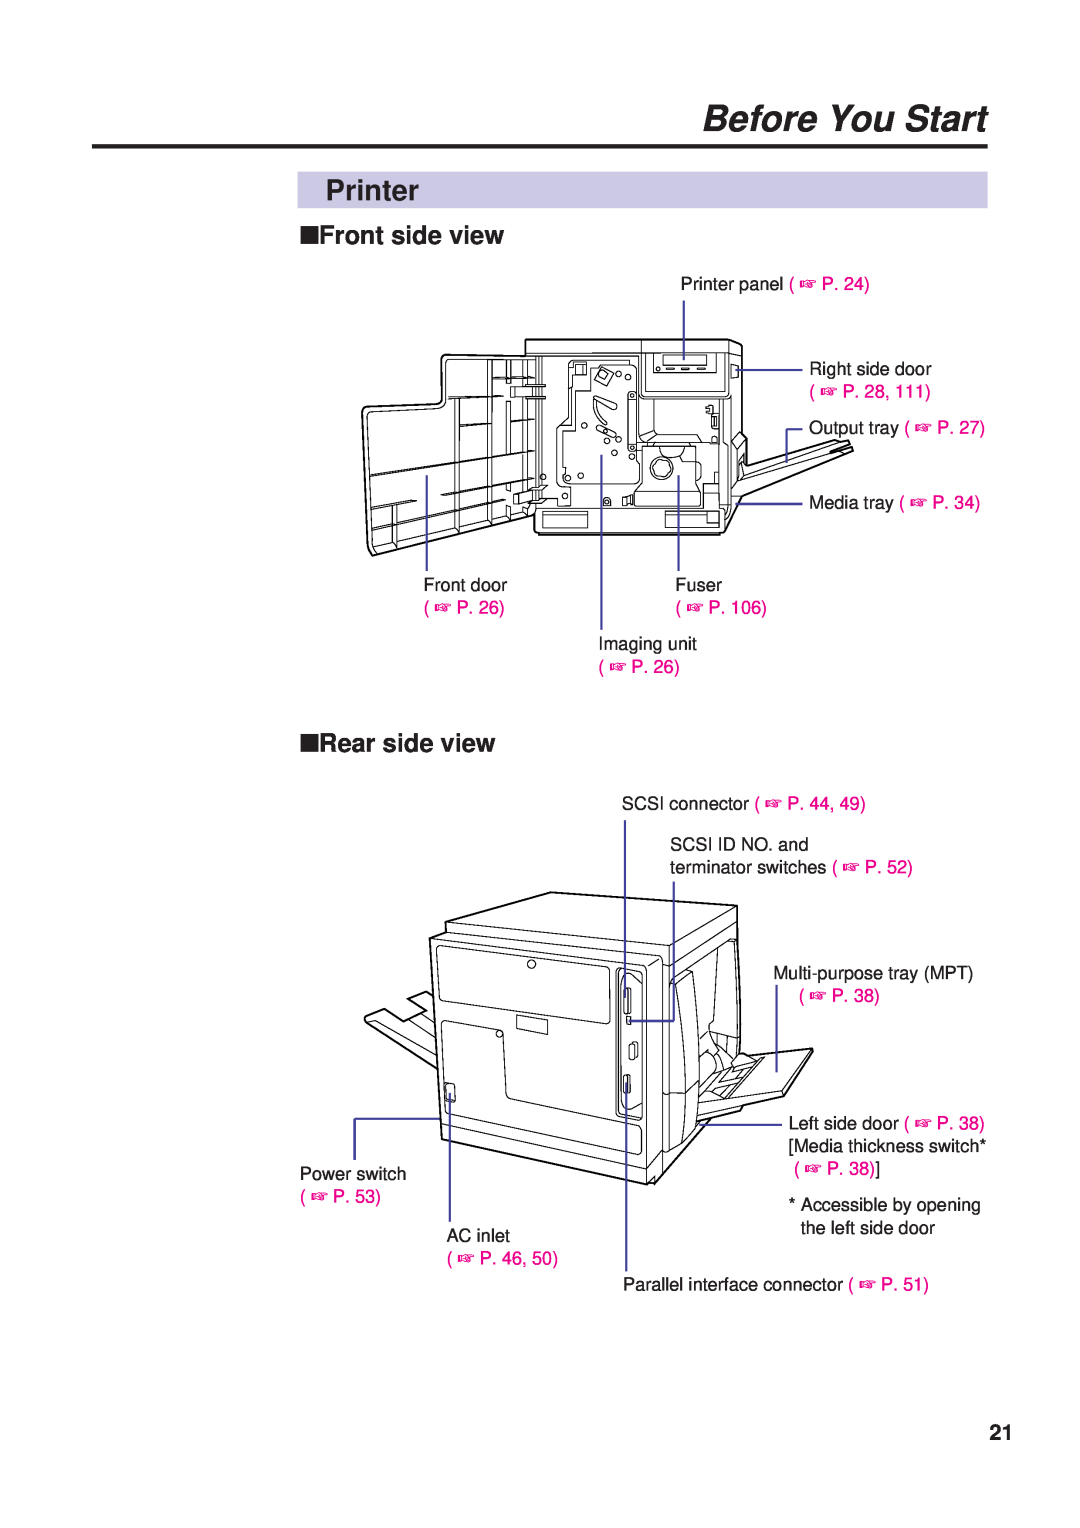 Panasonic KX-PS8000 manual Printer, Before You Start, Front side view, Rear side view 